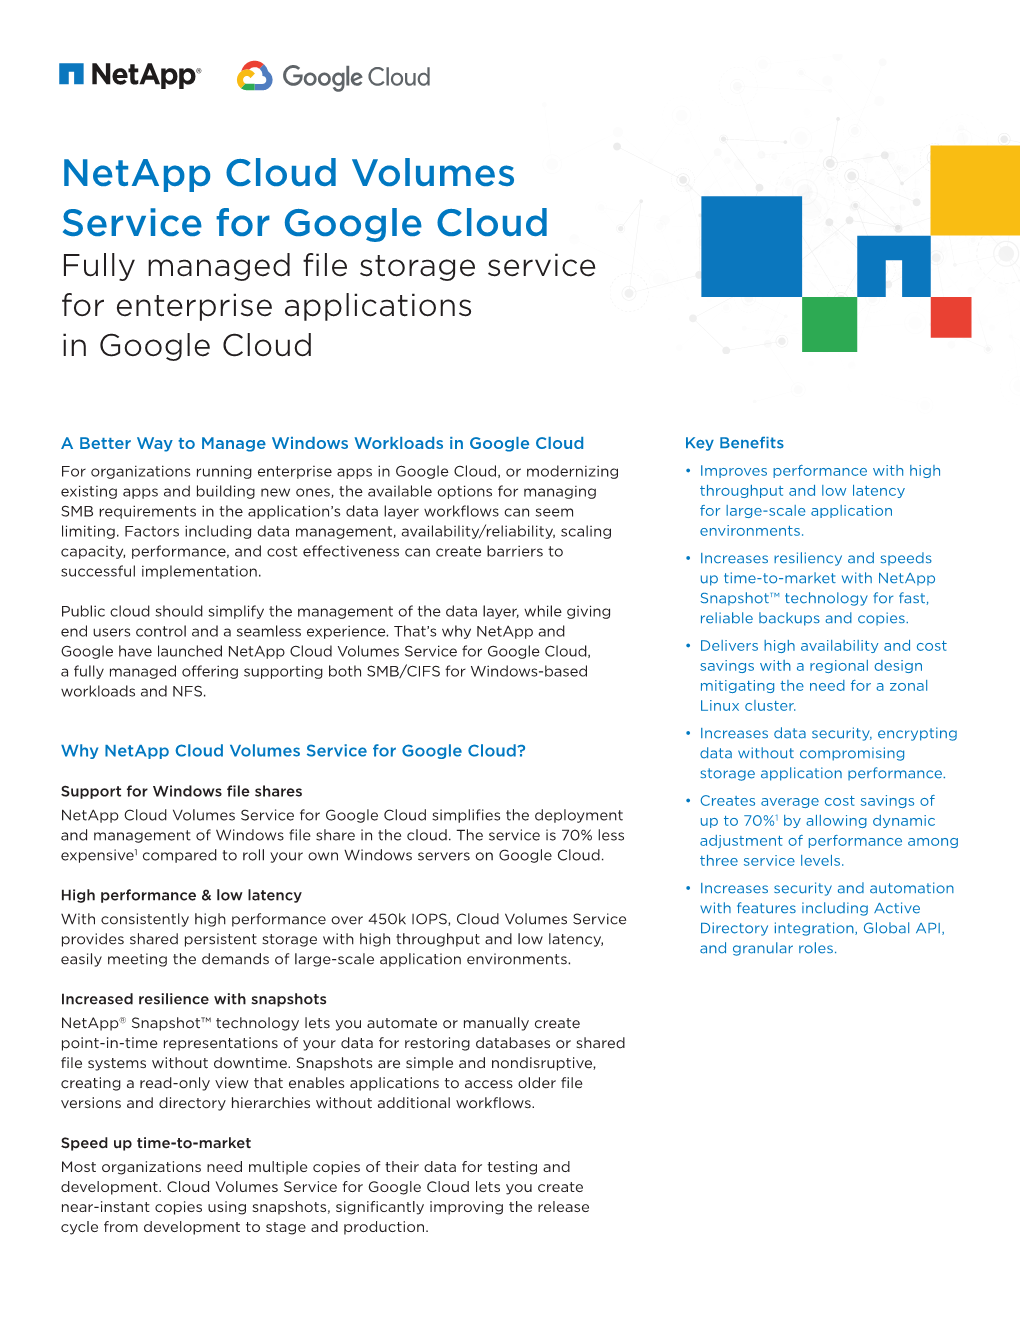 Netapp Cloud Volumes Service for Google Cloud Fully Managed File Storage Service for Enterprise Applications in Google Cloud